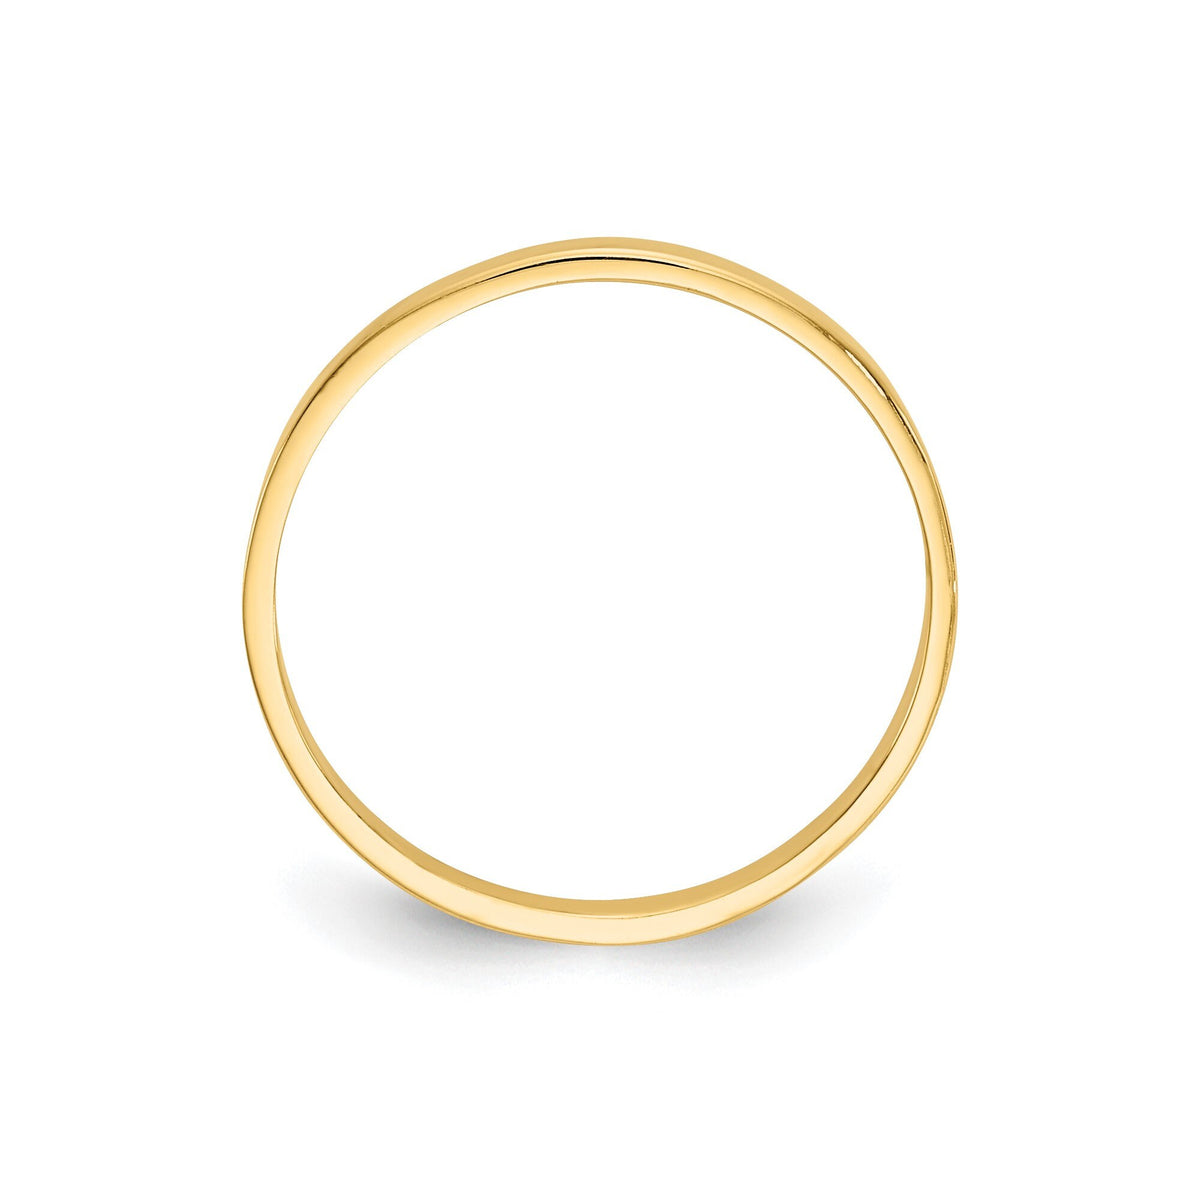 14k Yellow Gold Flat High Polished 1mm Ring Baby to Toddler/ Band Size 1- 4 (1-5 year olds) Toddler Size Children's Ring Band with Heart